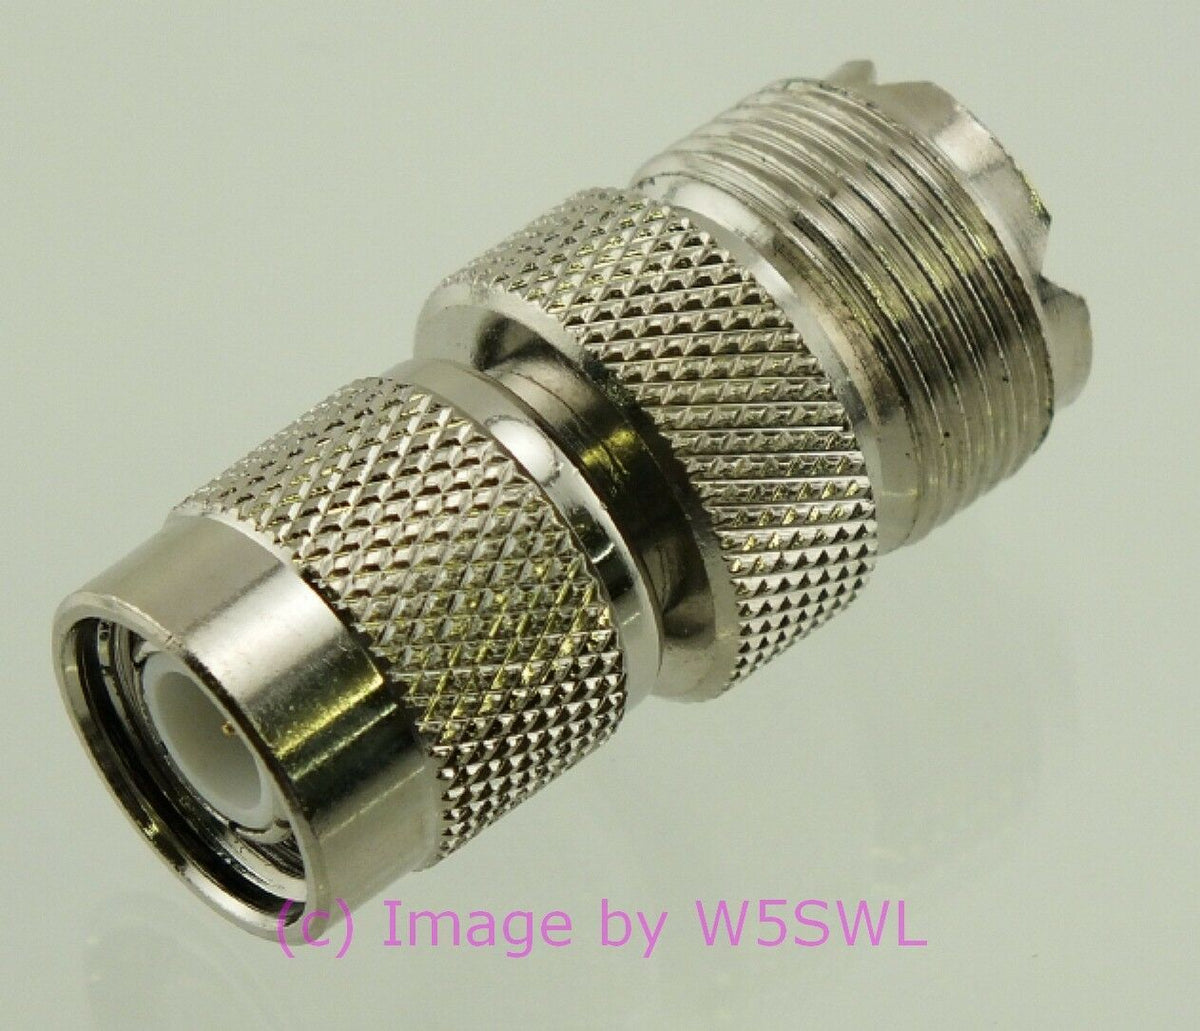 W5SWL TNC Male to UHF Female Coax Connector Adapter - Dave's Hobby Shop by W5SWL